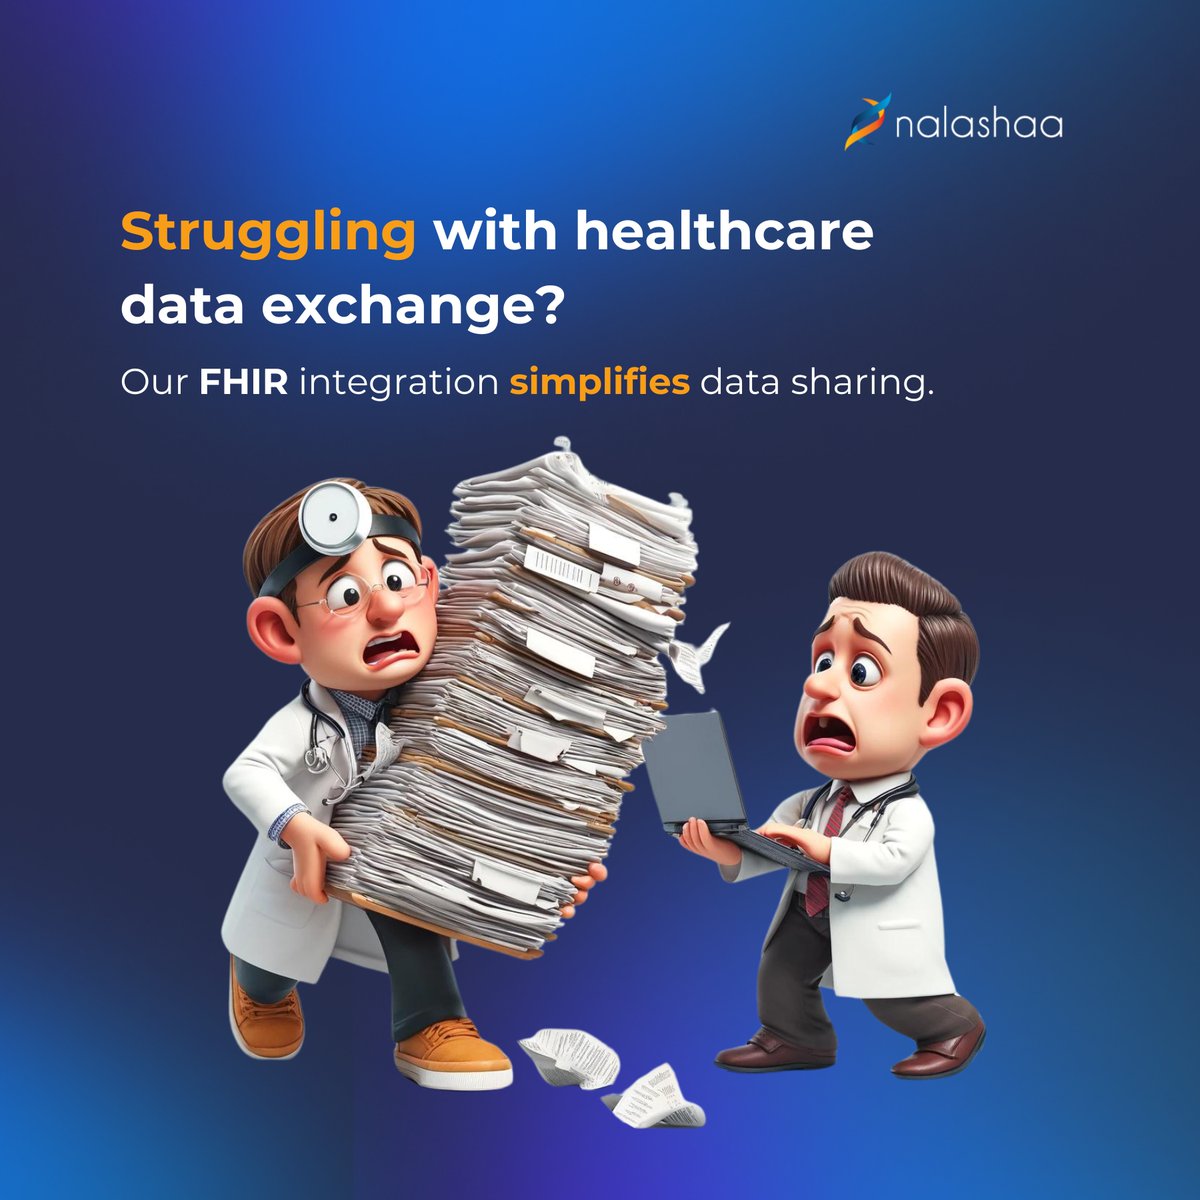 Join the data revolution! 

Learn more here: bit.ly/3vFa0HQ

#FHIR #Interoperablity #Healthcare #HealthcareIT #Healthcare #TeleHealth #HealthcareLeaders  #HCBES